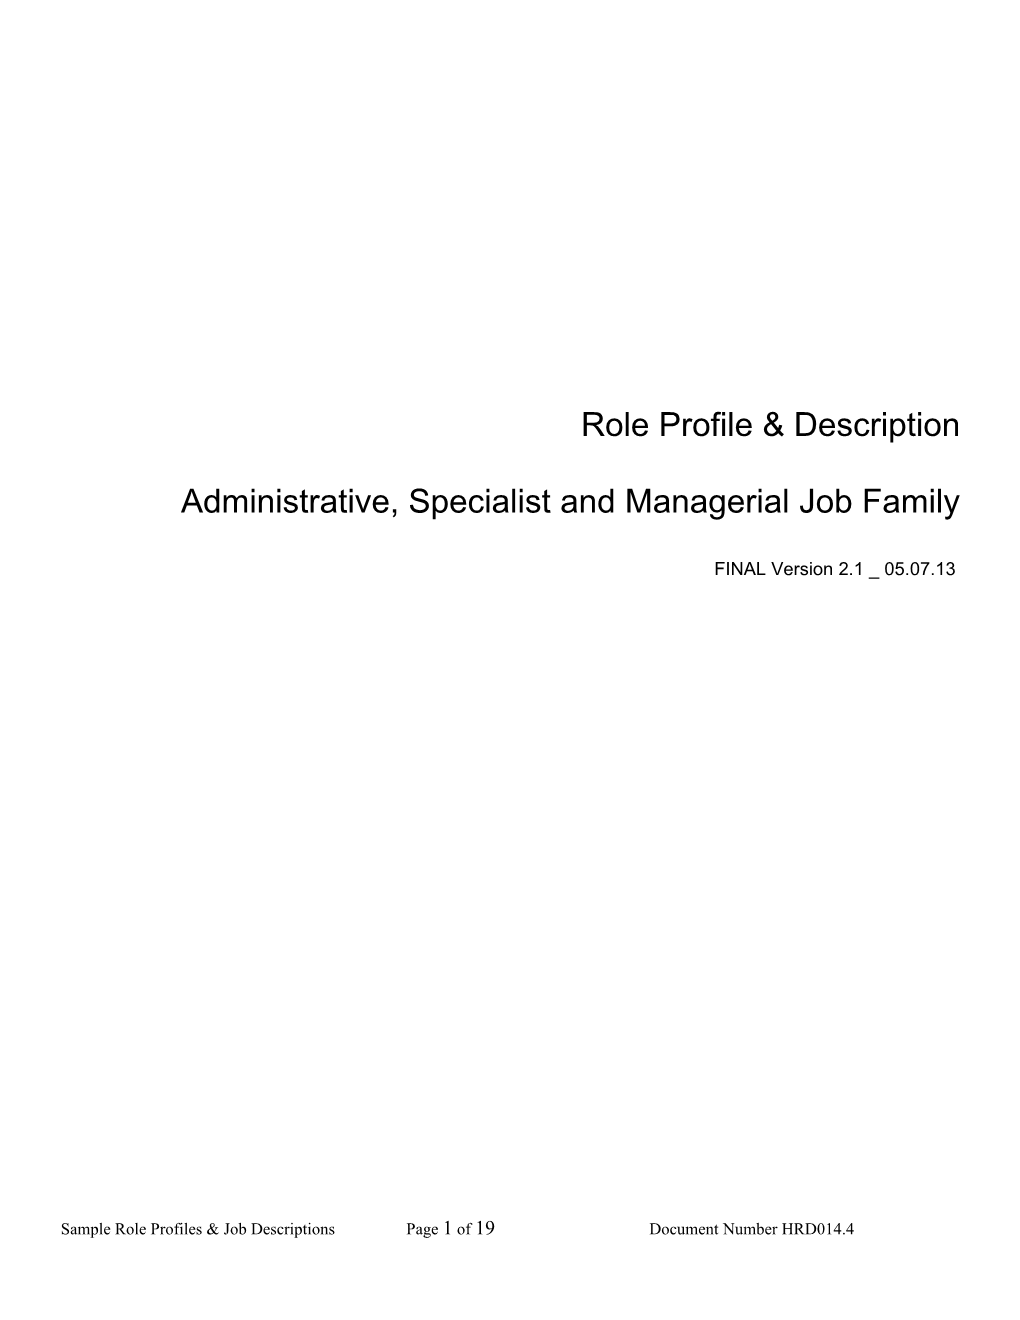 Administrative, Specialist and Managerial Job Family